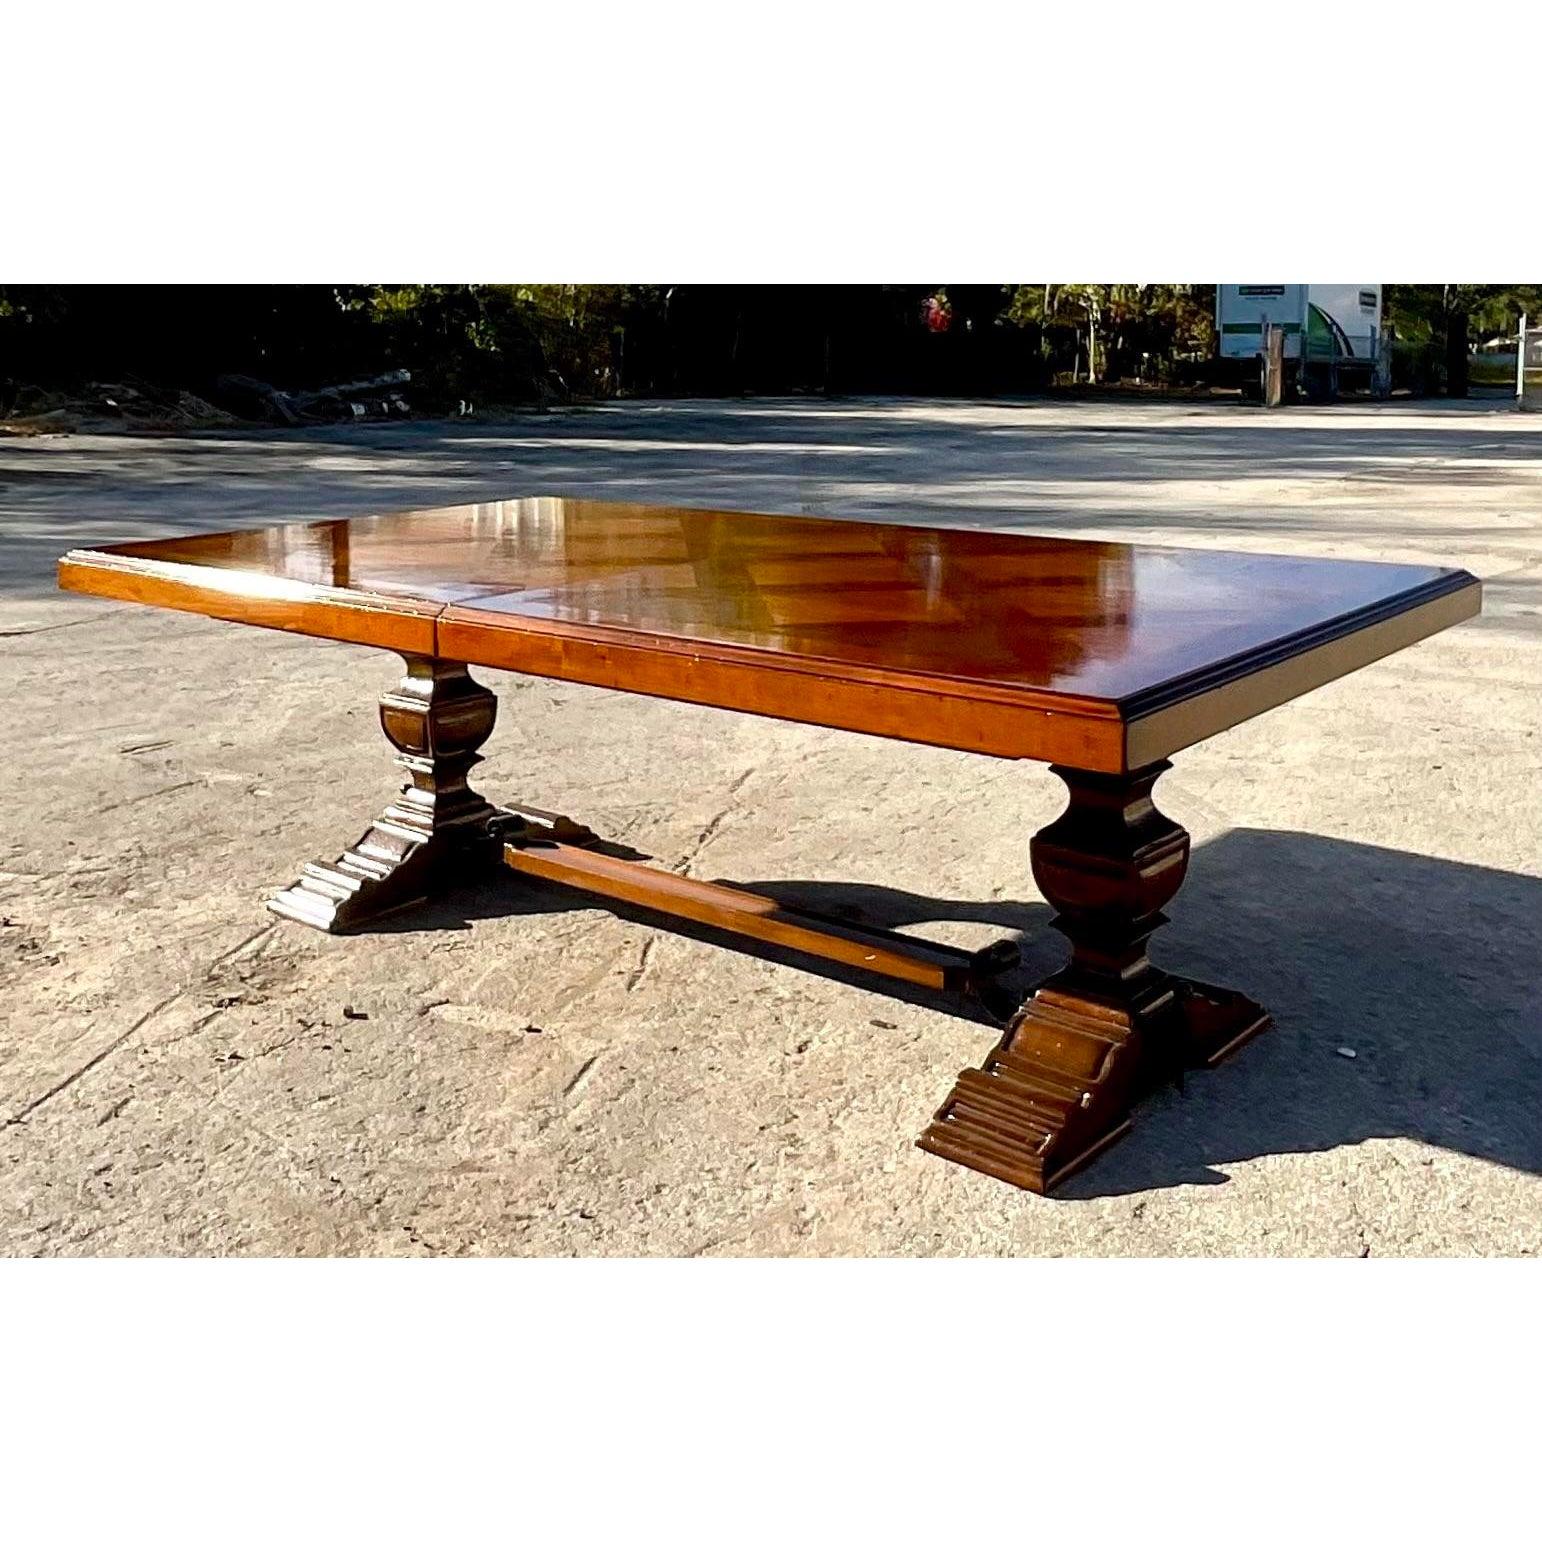 A spectacular Italian Inlay dining table. Made in Italy by the iconic Francesco Molon group. Beautiful wood grain detail with a classic farm table design. Two leaves for a massive dining table. Acquired from a Palm Beach estate.